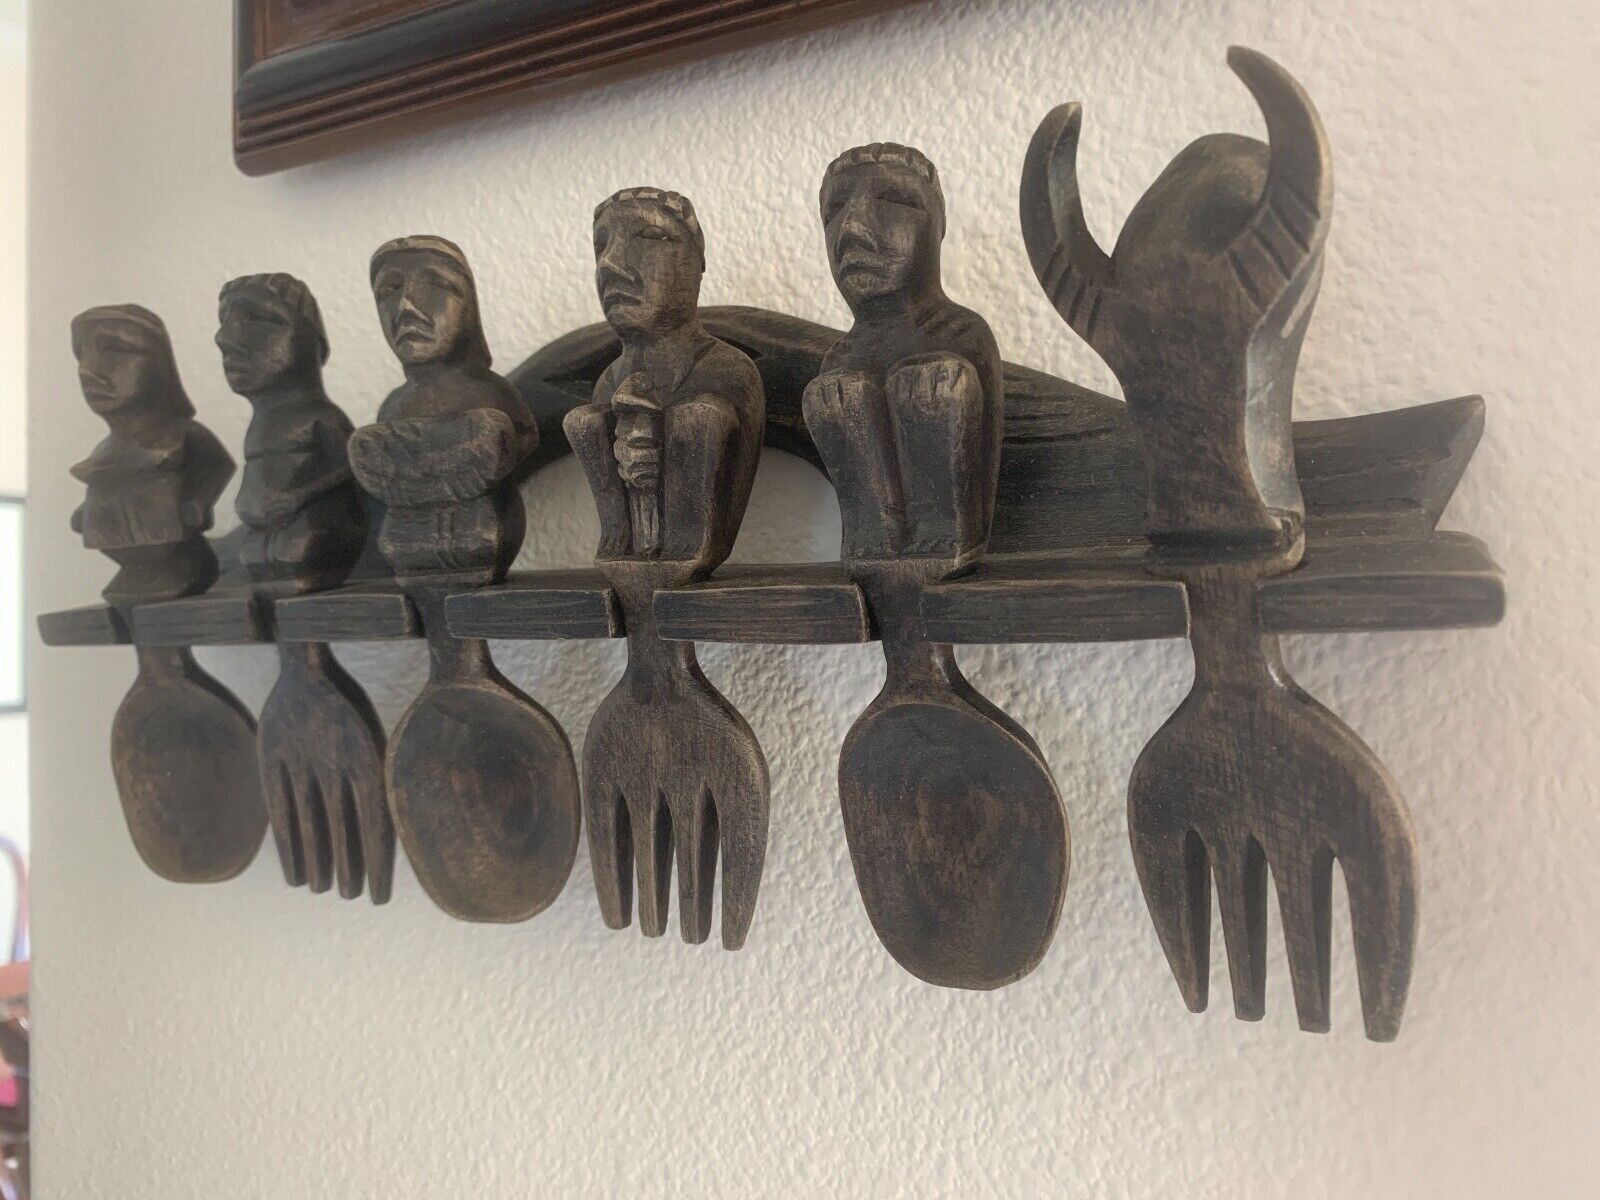 VTG Kitchen Decor Hand Carved Figurines Wood Spoon Fork Wall Decor Water Buffalo